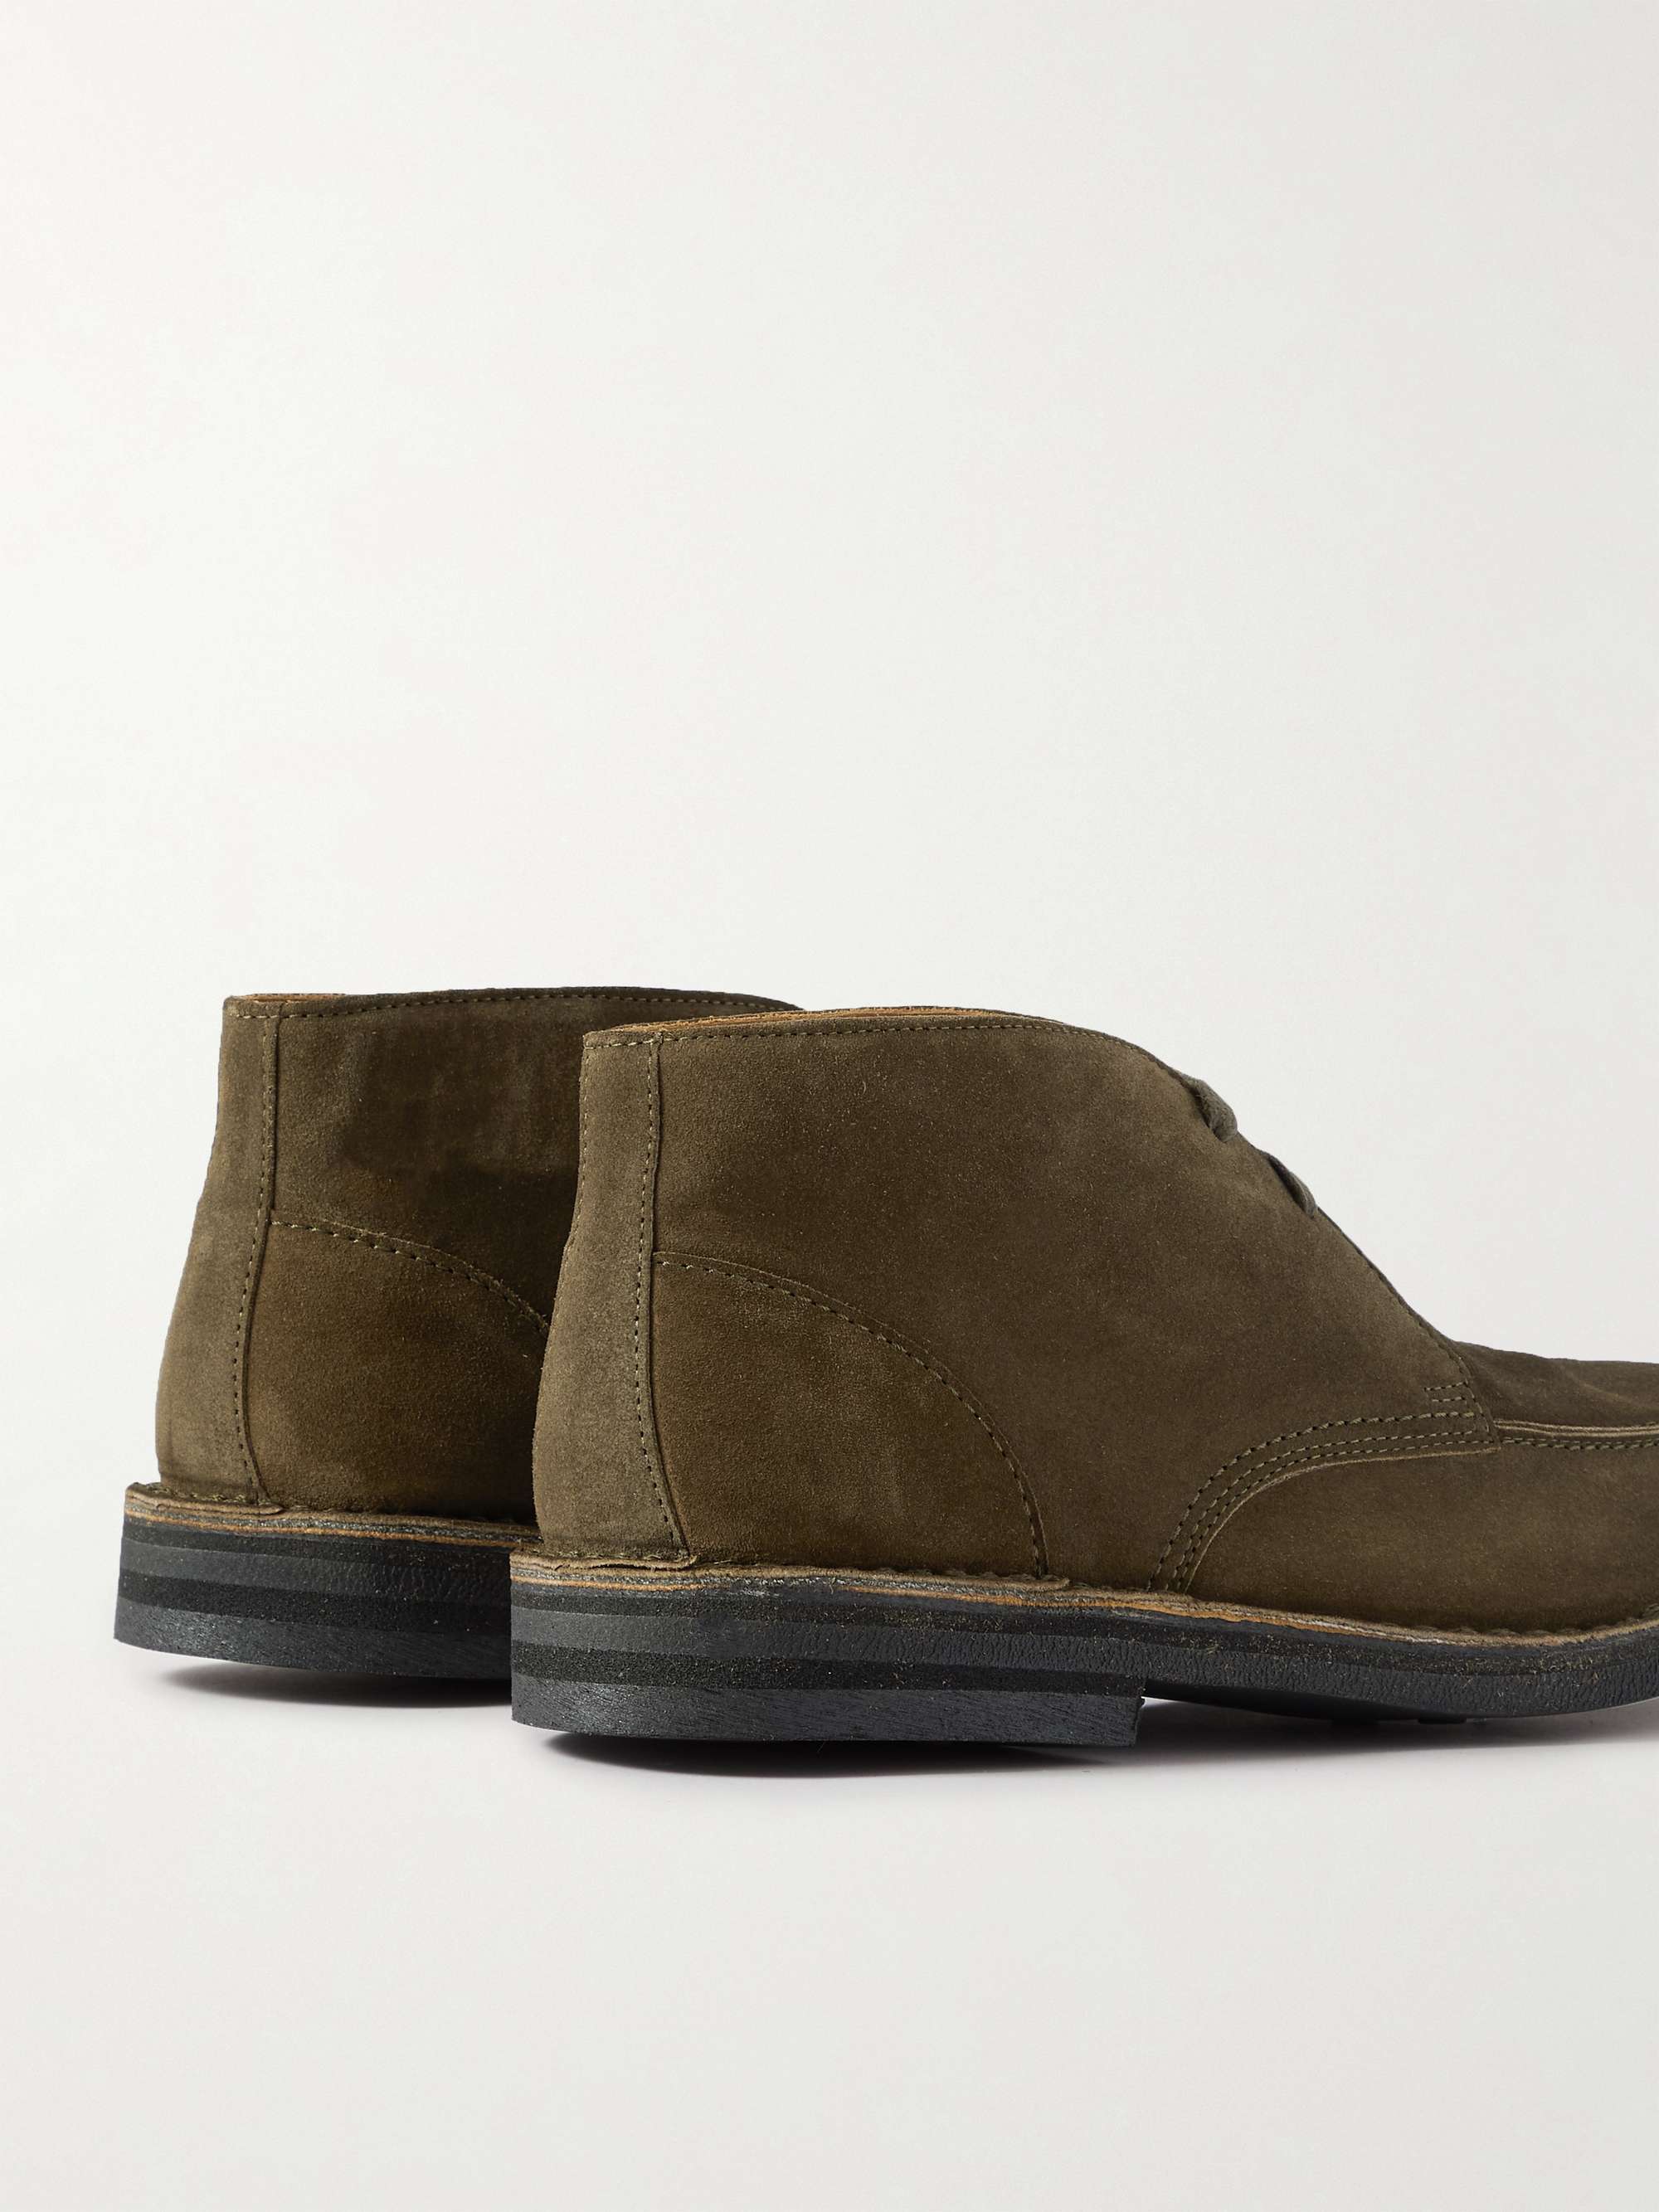 MR P. Andrew Split-Toe Shearling-Lined Regenerated Suede by evolo ...